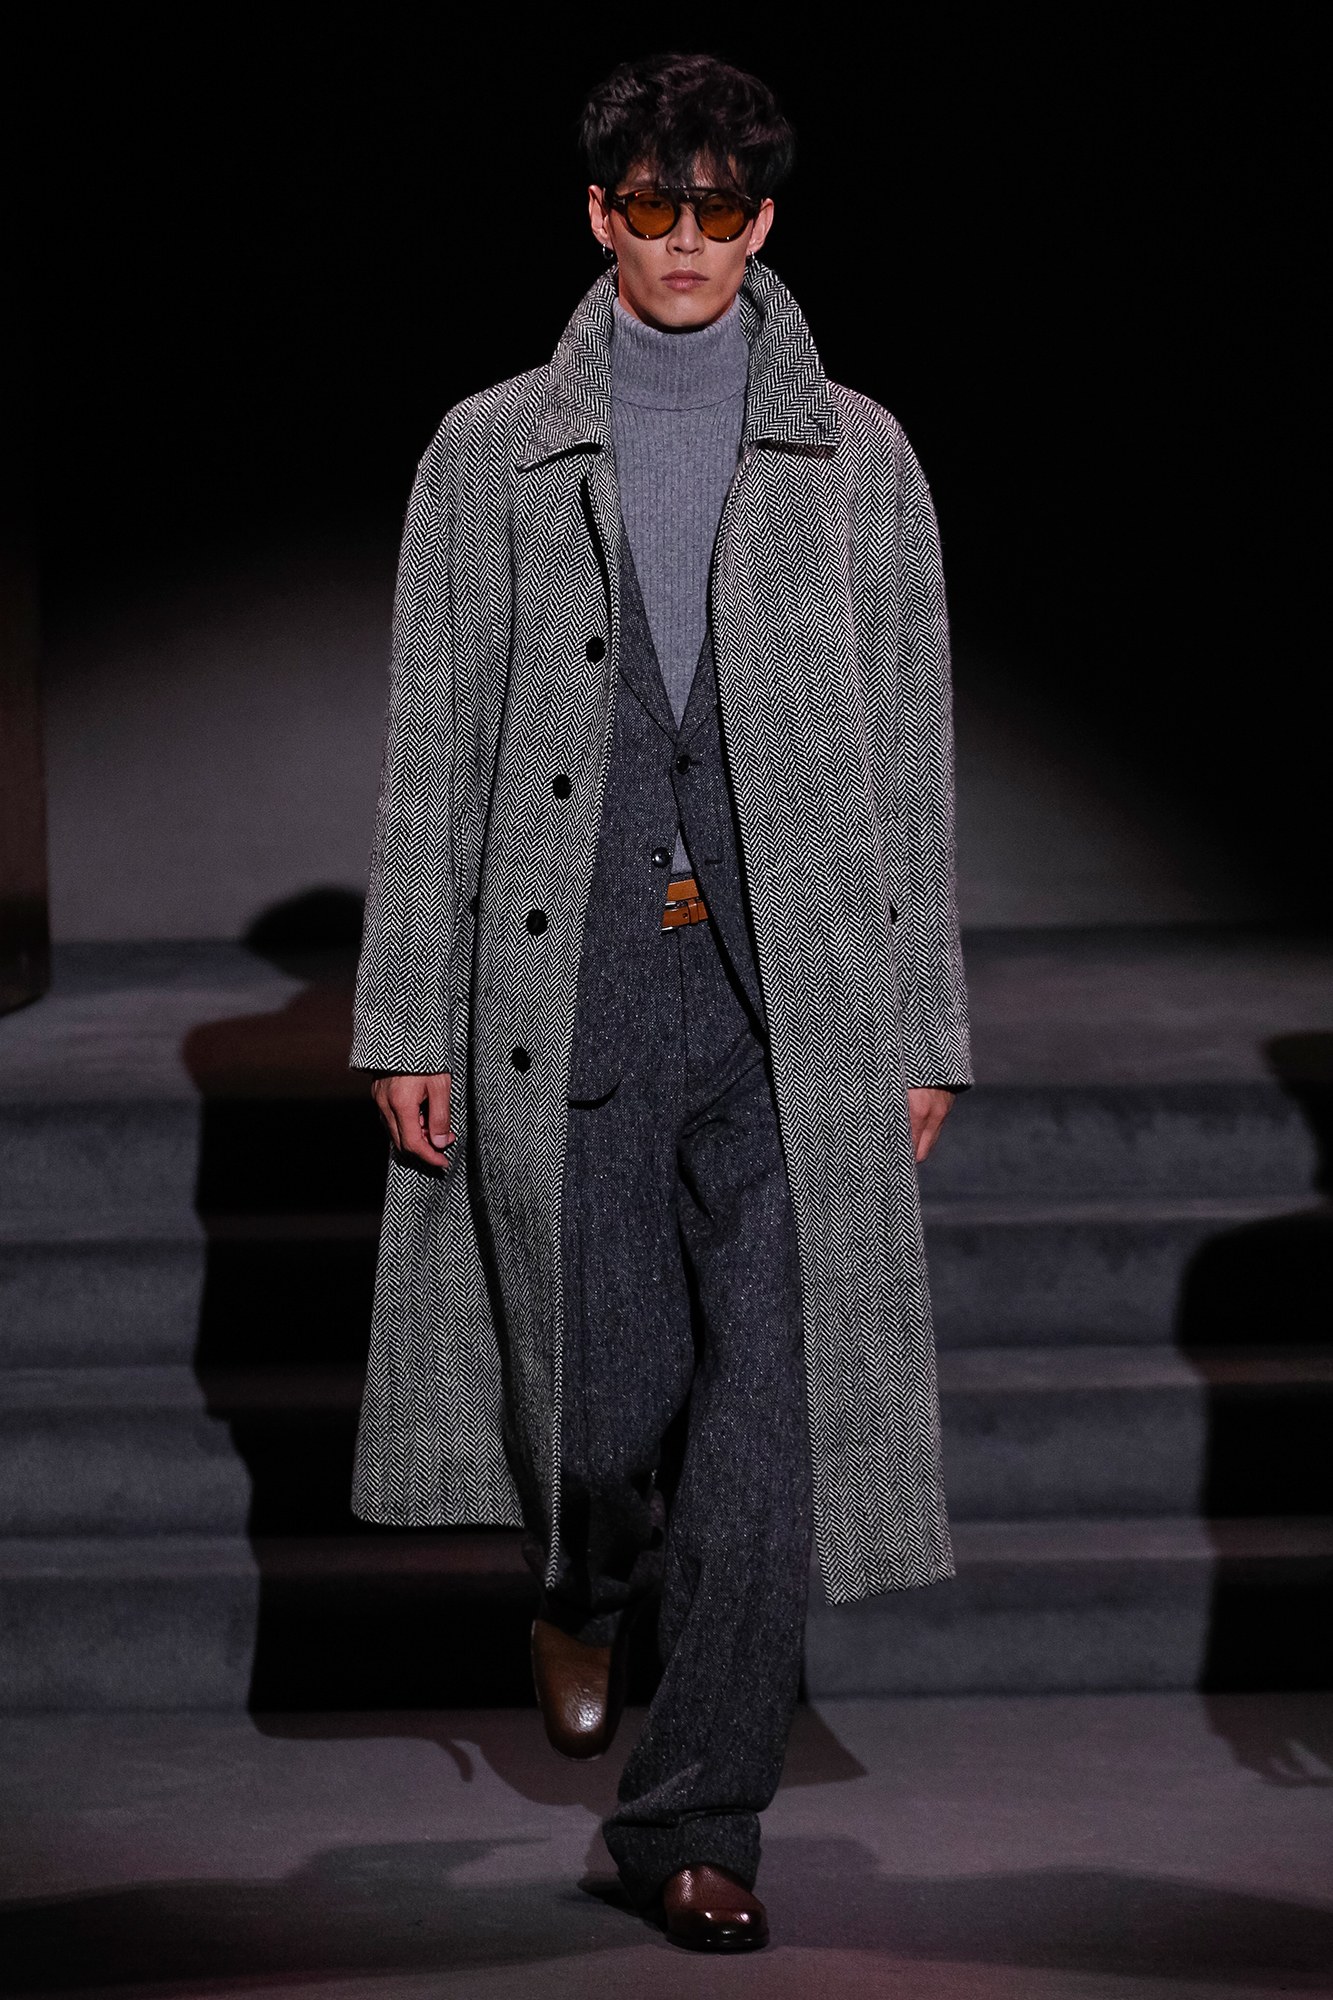 NYFW: Tom Ford Men’s Fall/Winter 2016 Collection